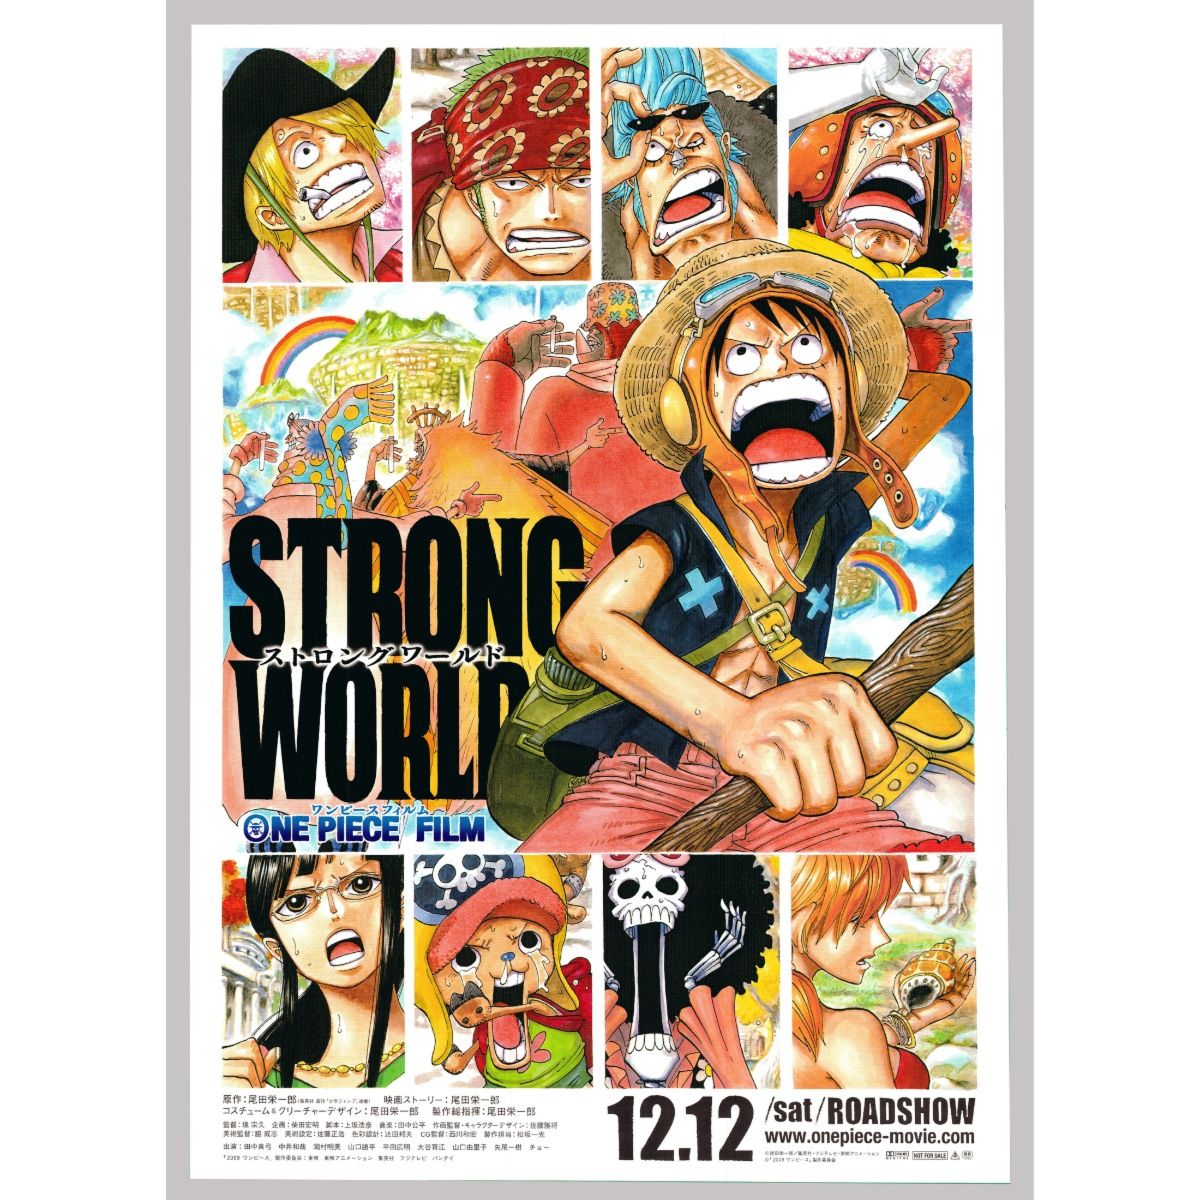 Buy Original One Piece Anime Poster, Strong World Online